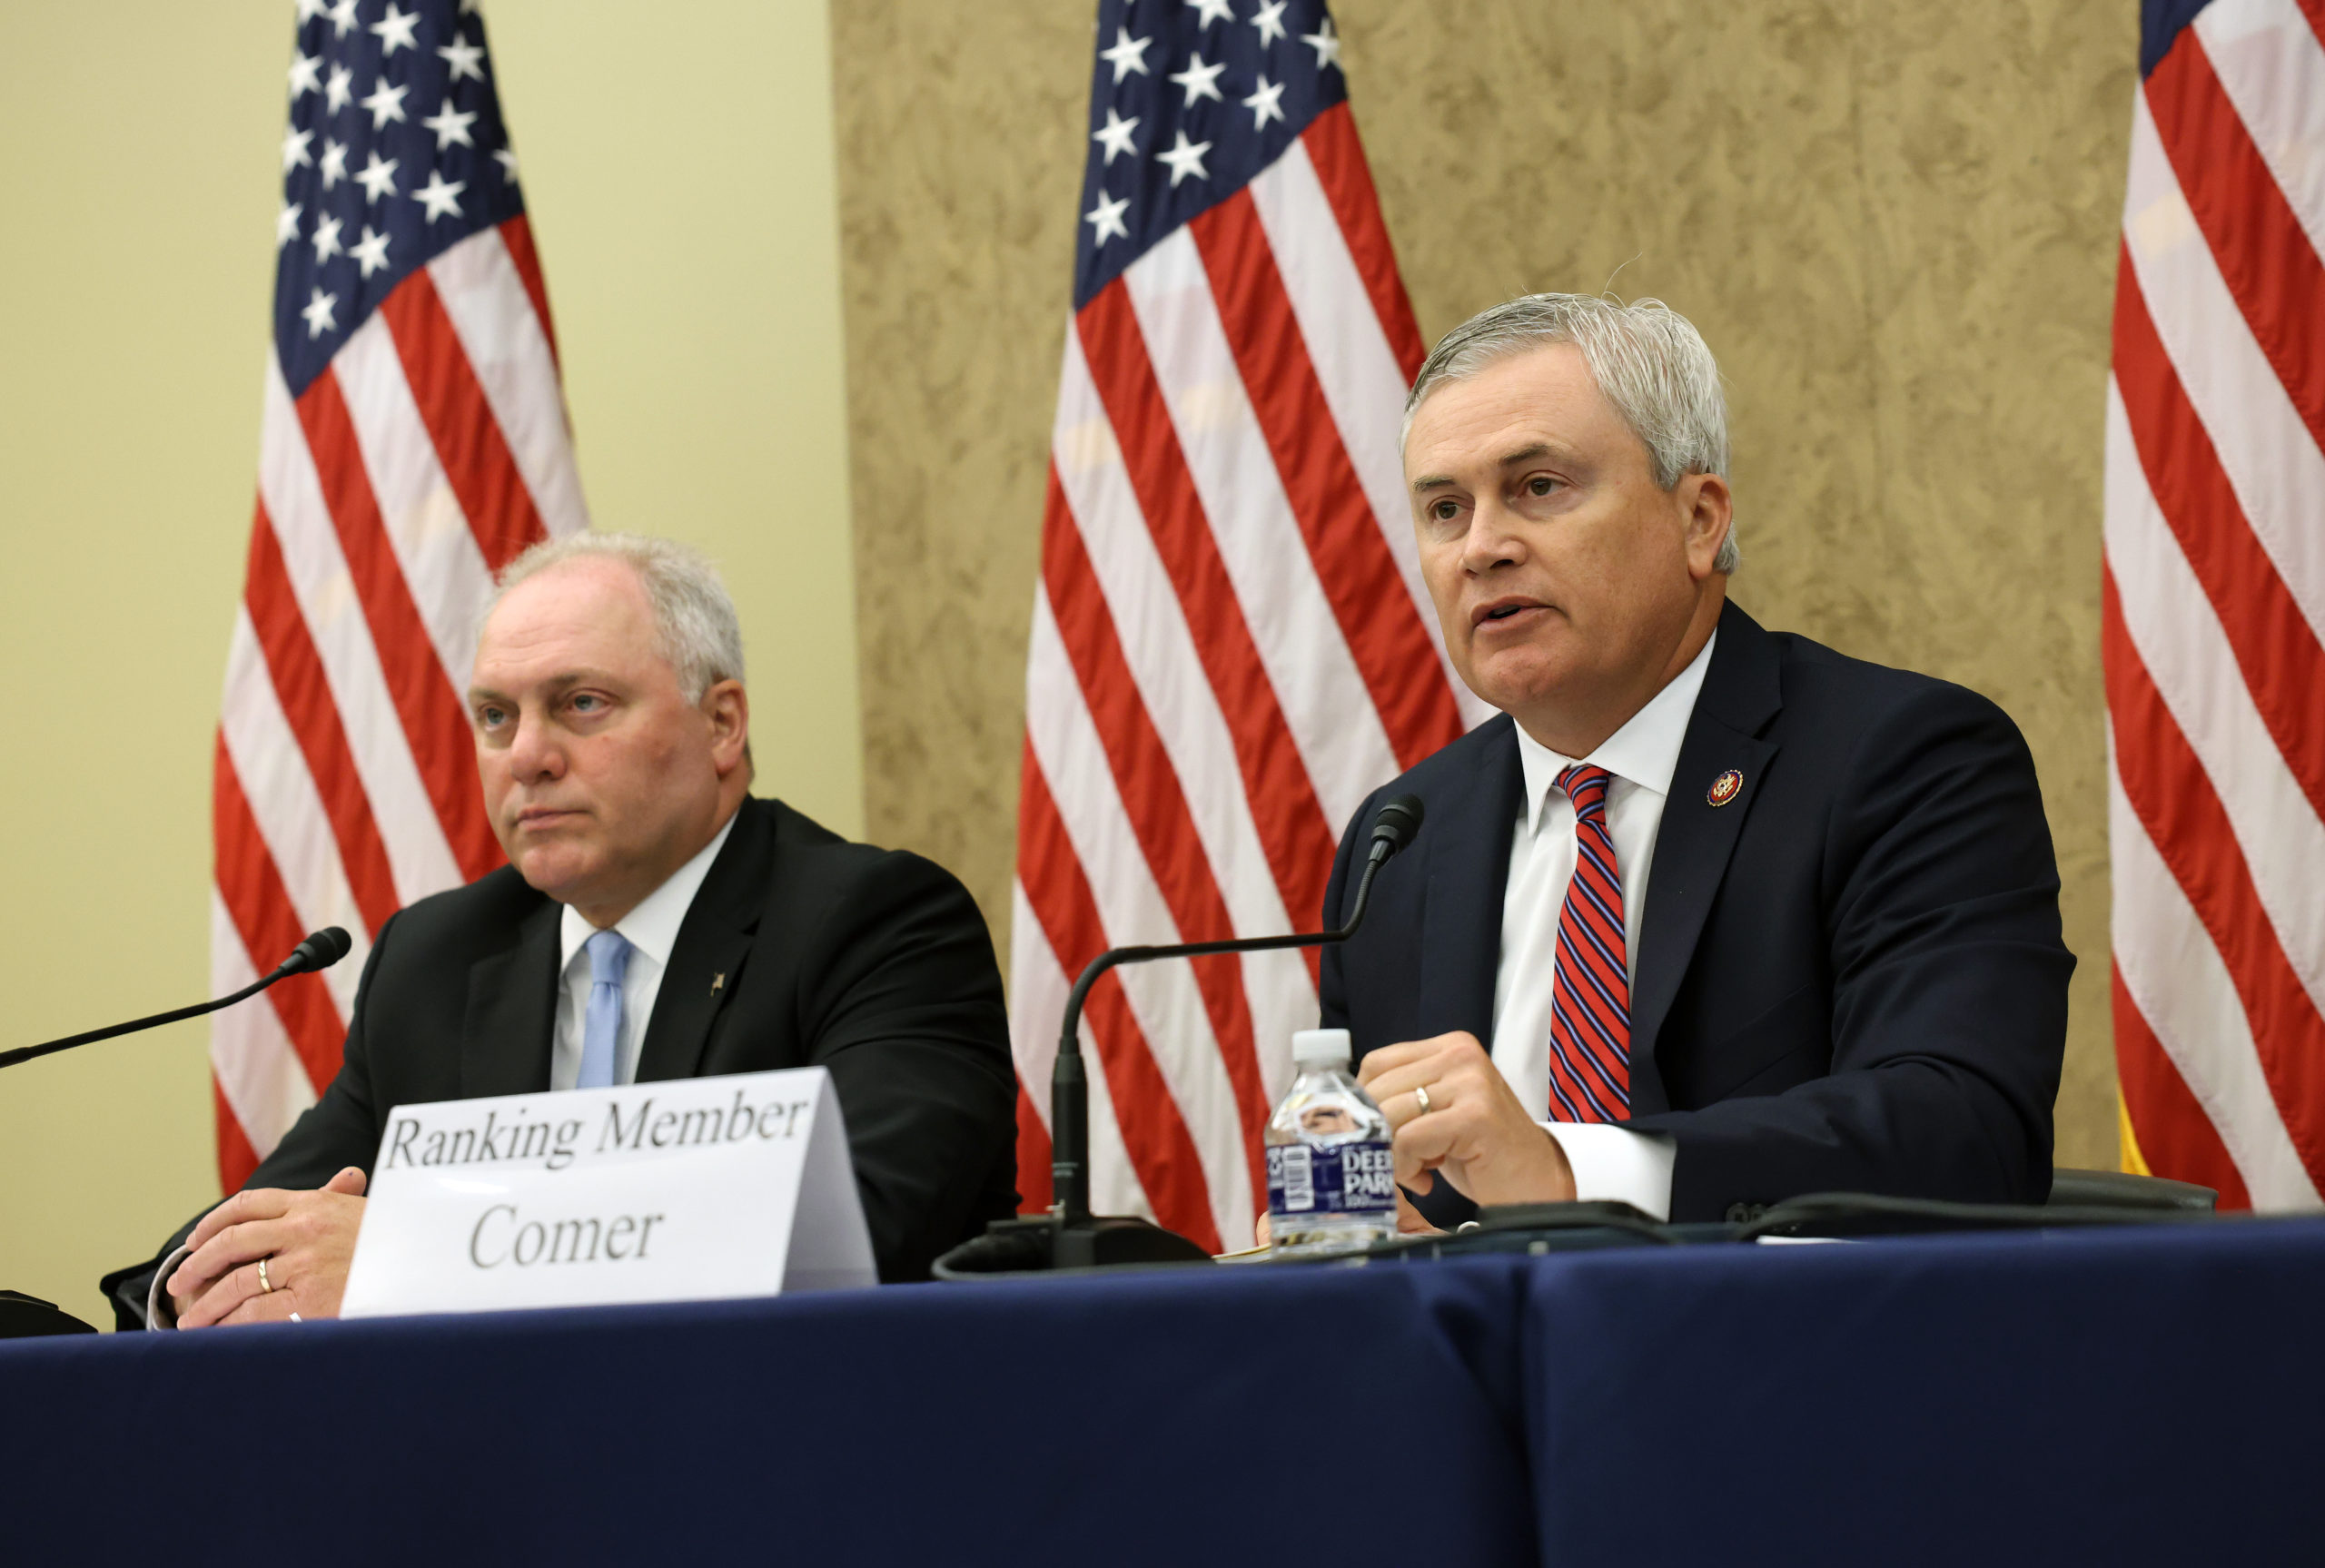 U.S. Rep. James Comer (R) (R-KY) and U.S. Rep. Steve Scalise (R-LA) participate in a Republican-led forum on the origins of the COVID-19 virus at the U.S. Capitol on June 29, 2021 in Washington, DC.(Photo by Kevin Dietsch/Getty Images)